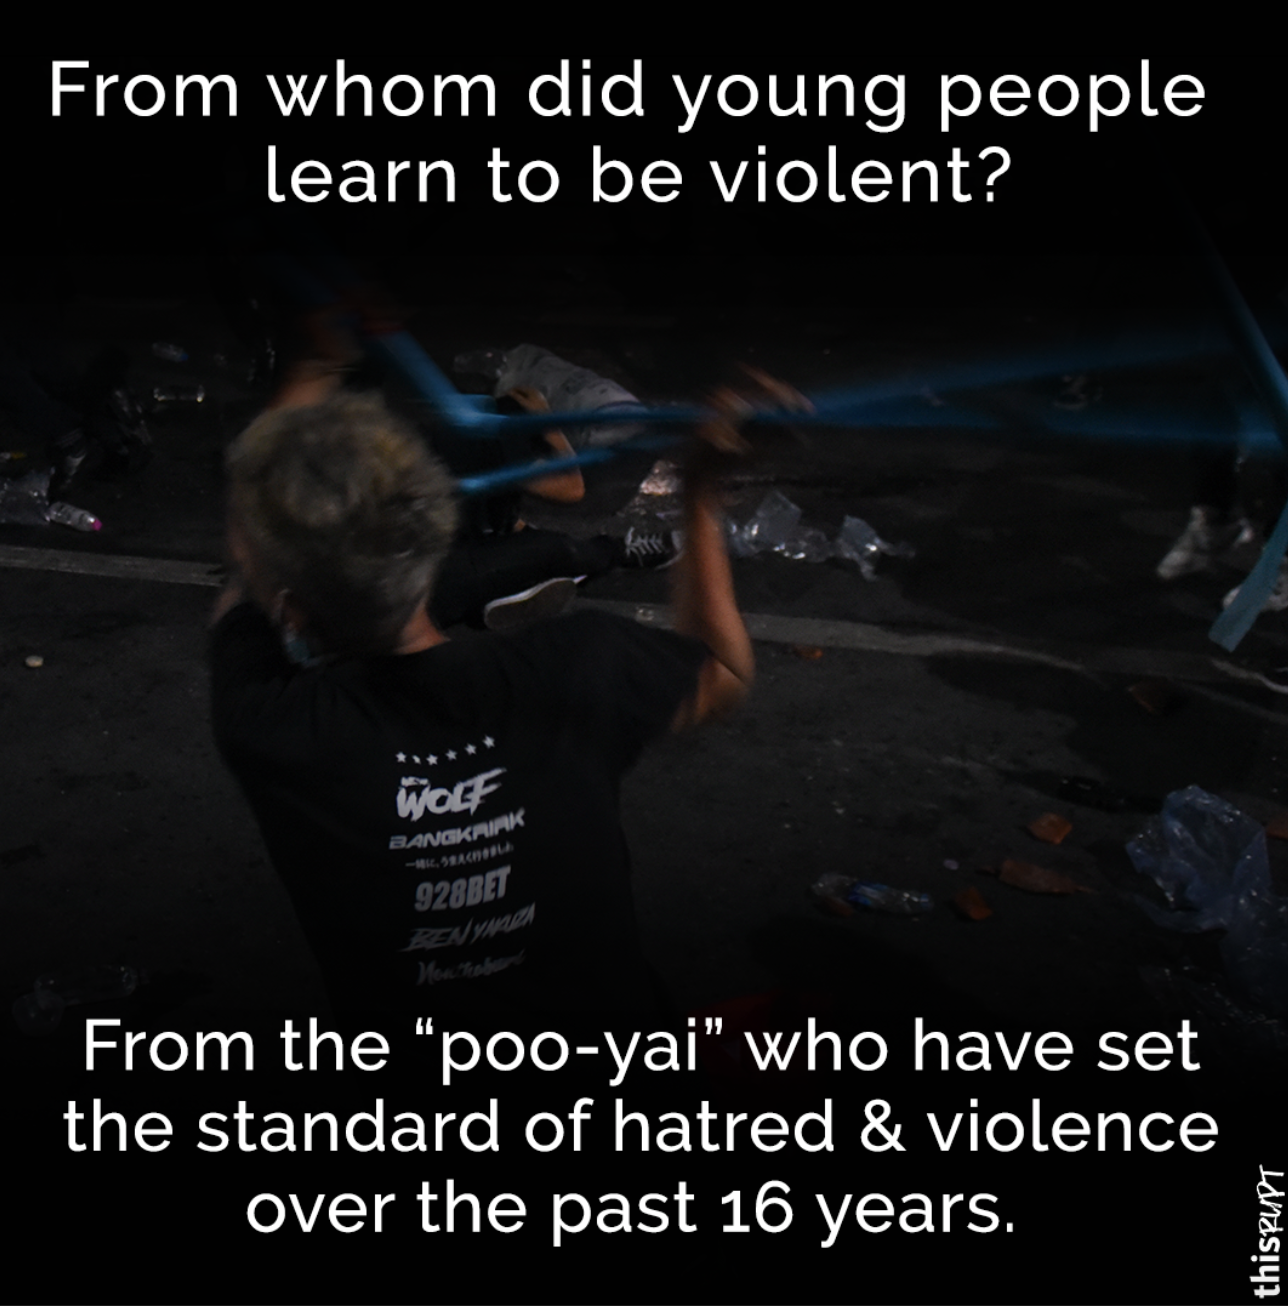 From Whom did Young People Learn to be Violent?